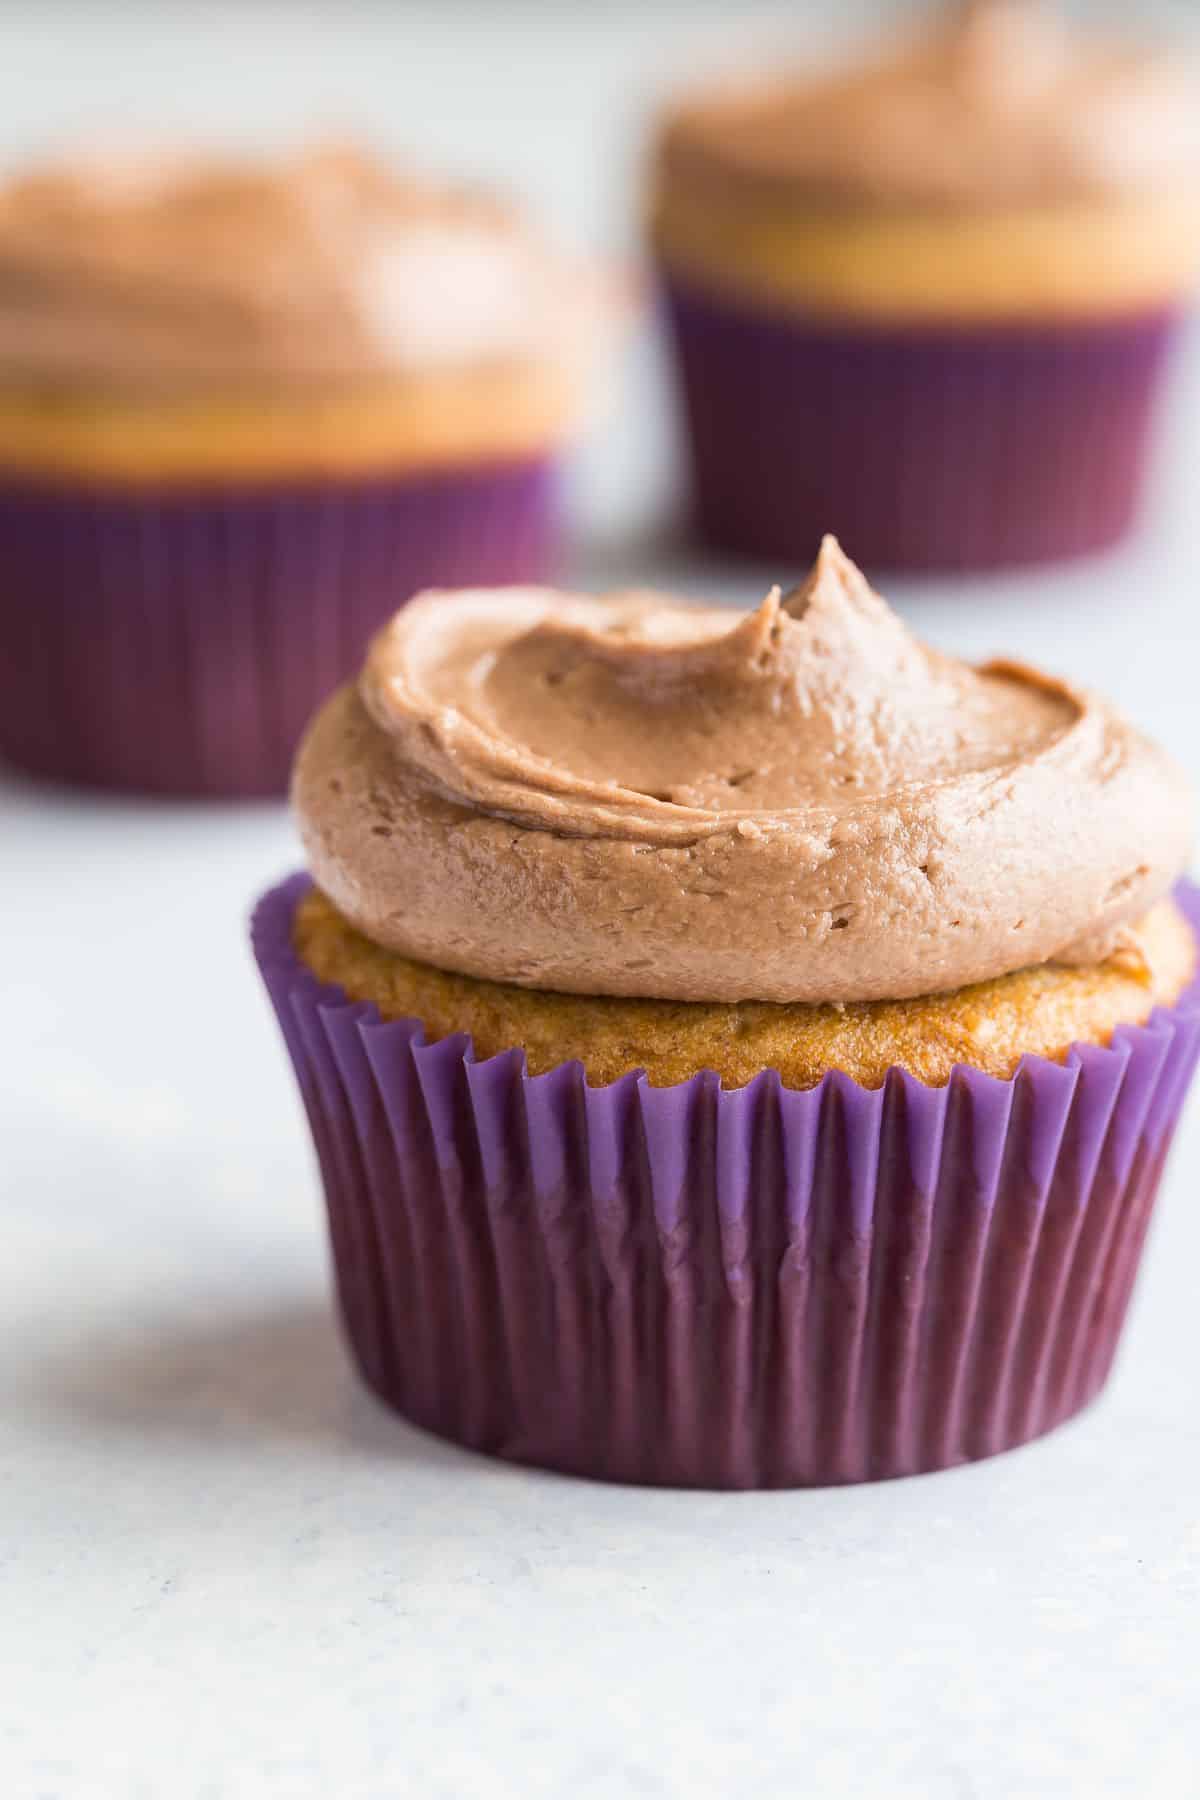 Banana cupcakes topped with Nutella frosting.